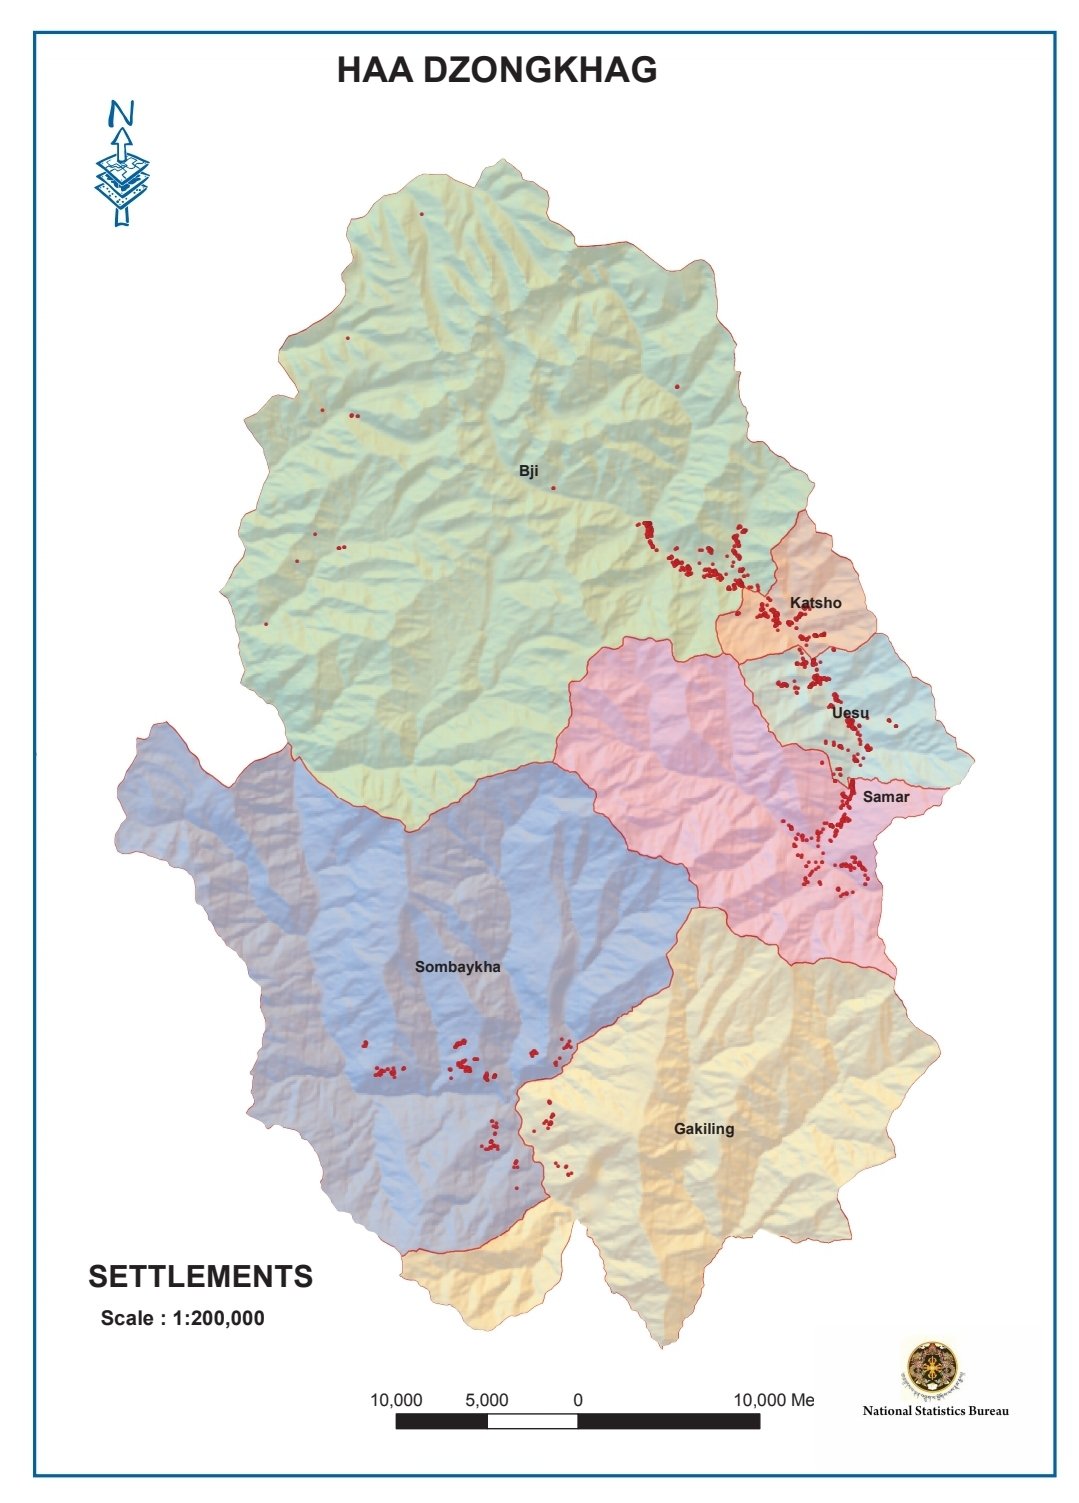 Vishnu Som on Twitter: "Key question. Here is the location of the village  superimposed on an official government map from the Statistics Bureau of  Bhutan. This clearly shows all of the Doklam